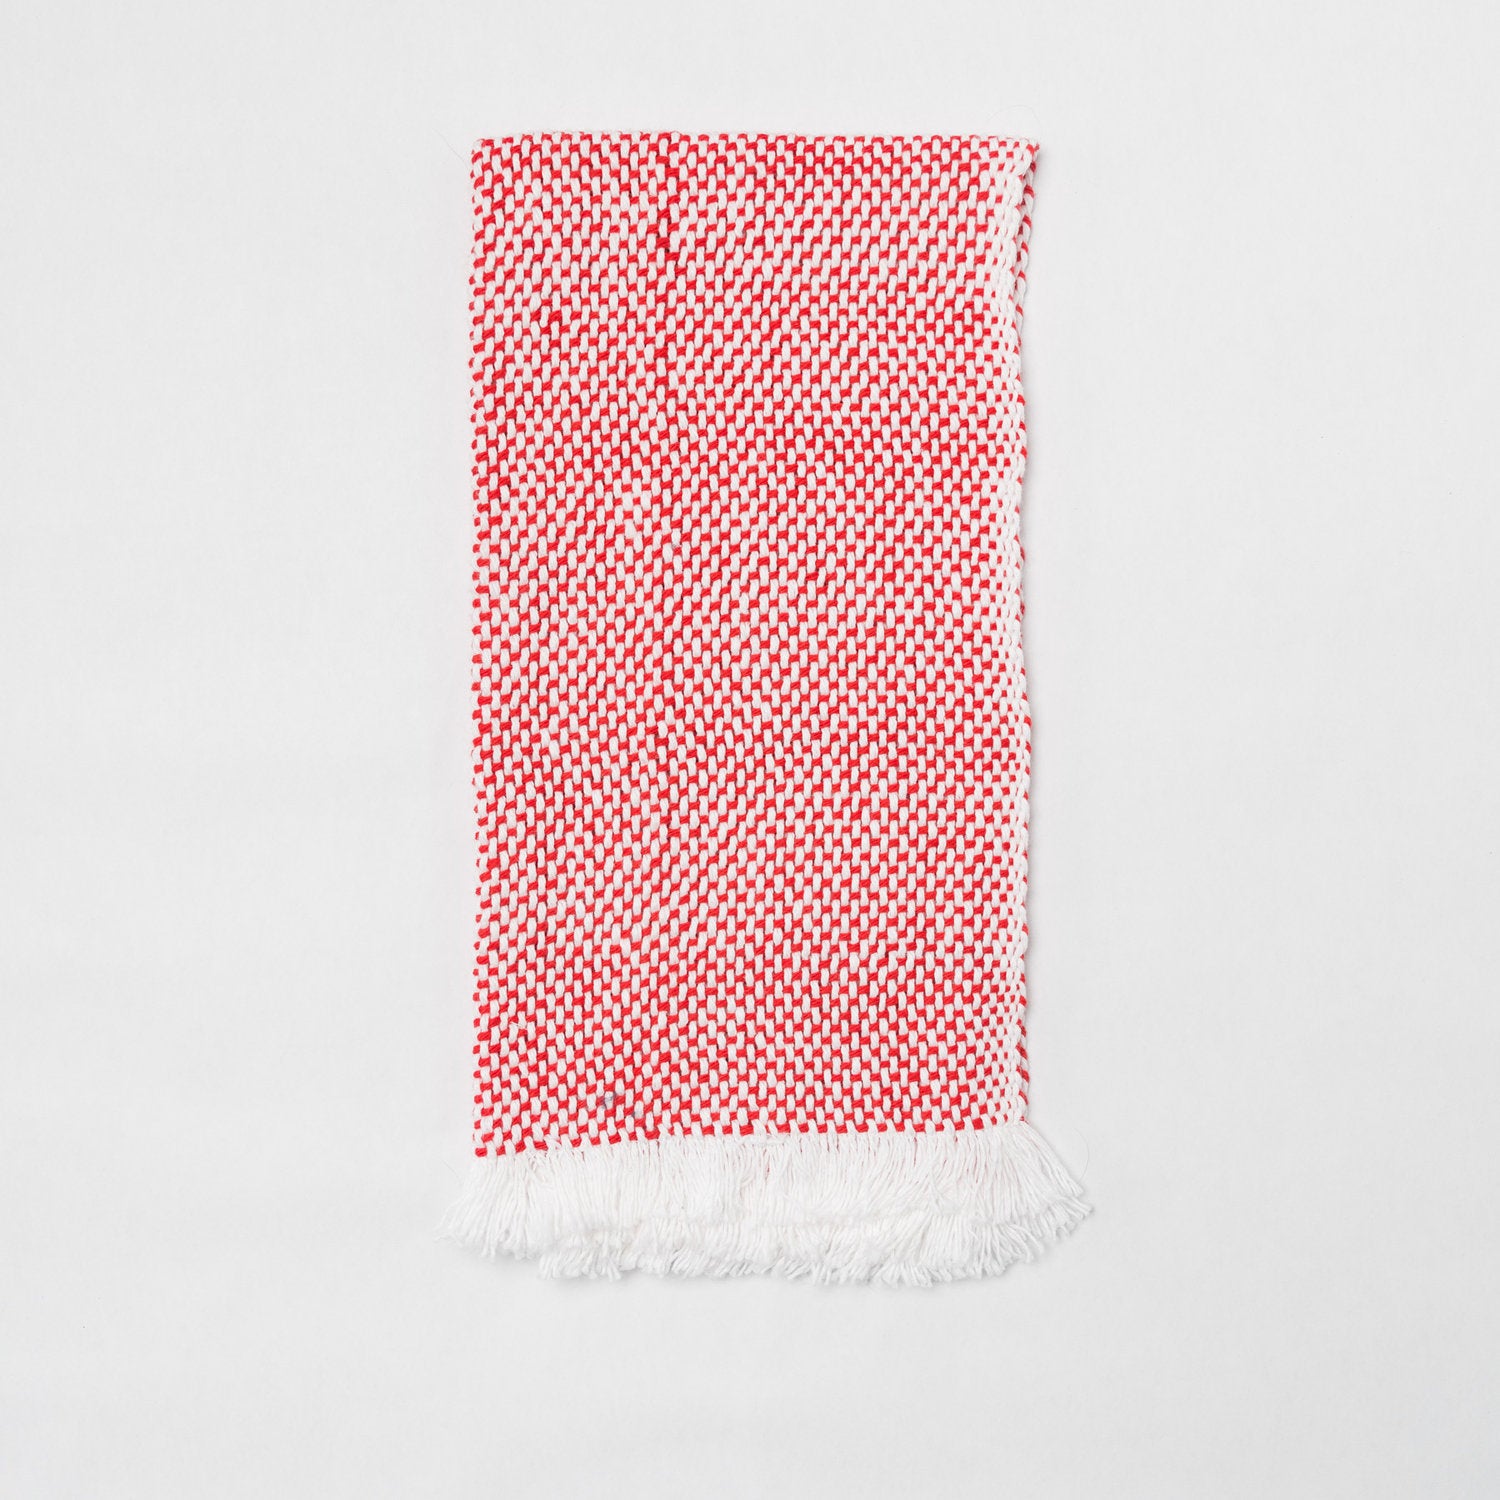 Shop American-Made and Woven, Red + White Hand Towel